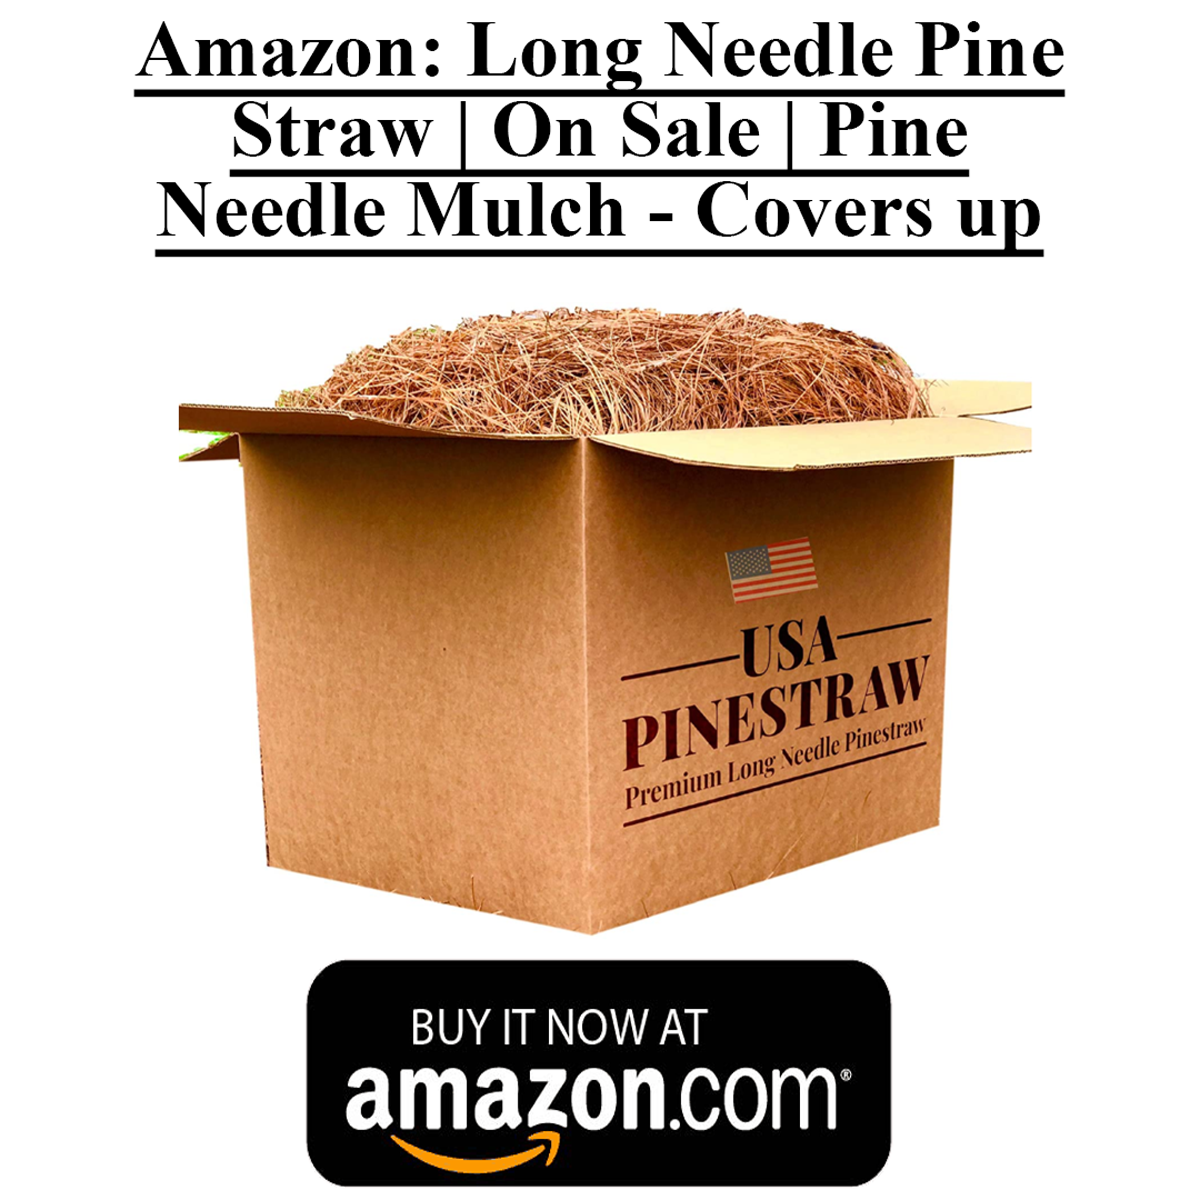 Box Of Long Pine Needles That You Can Purchase On Amazon. Pine Needles Are Ideal For Beekeeping Smokers. Made In The USA